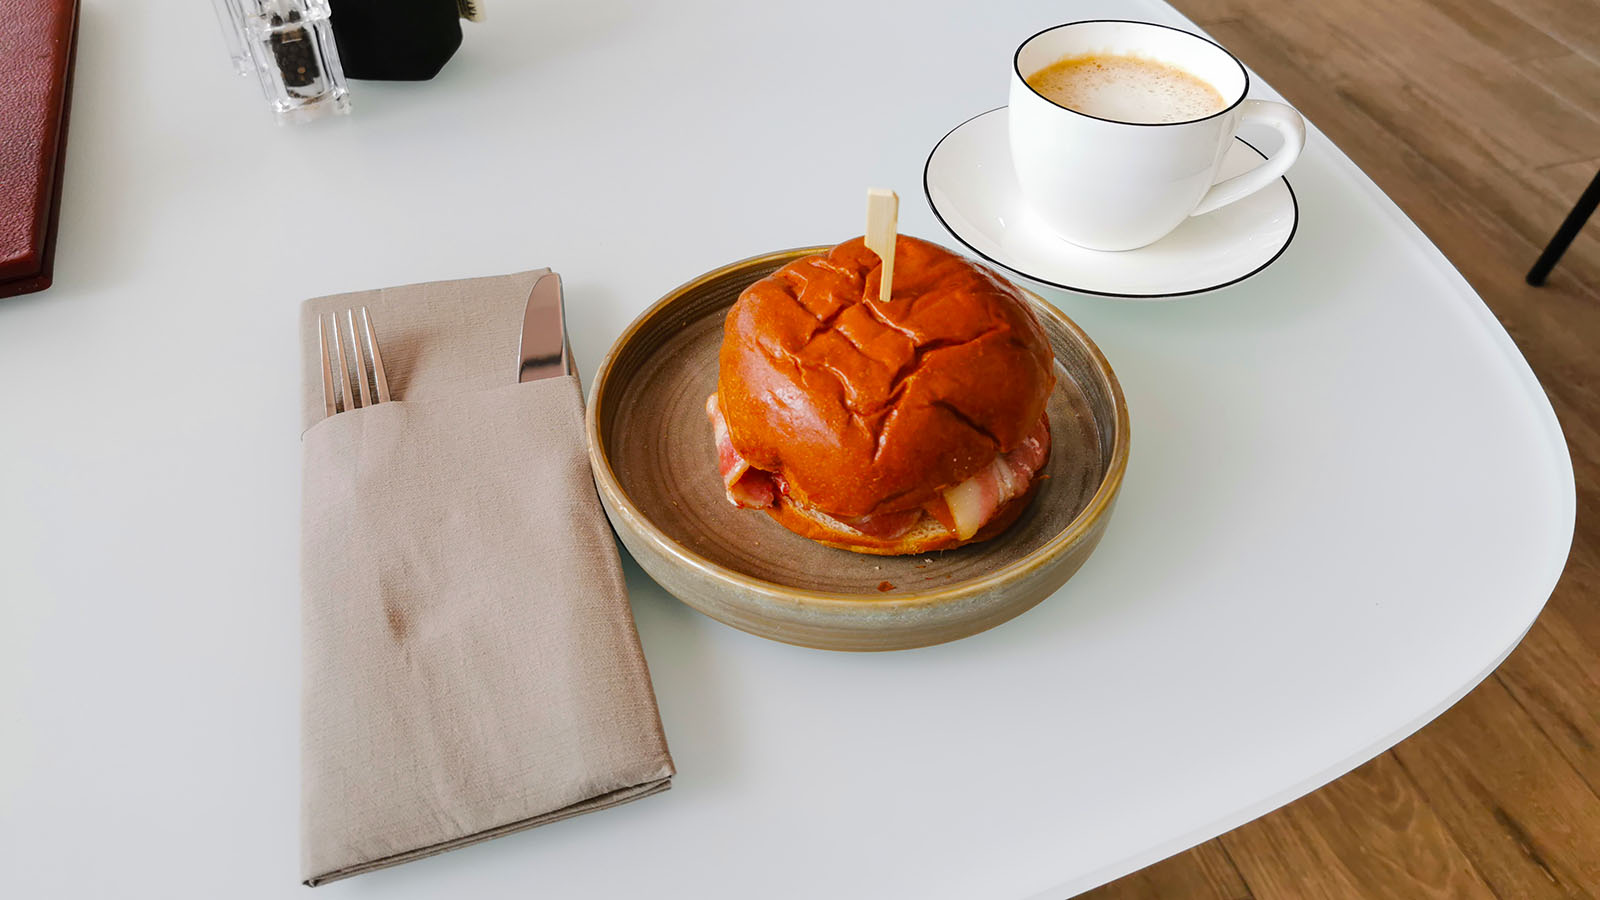 Bacon roll in the American Airlines Arrivals Lounge at London Heathrow